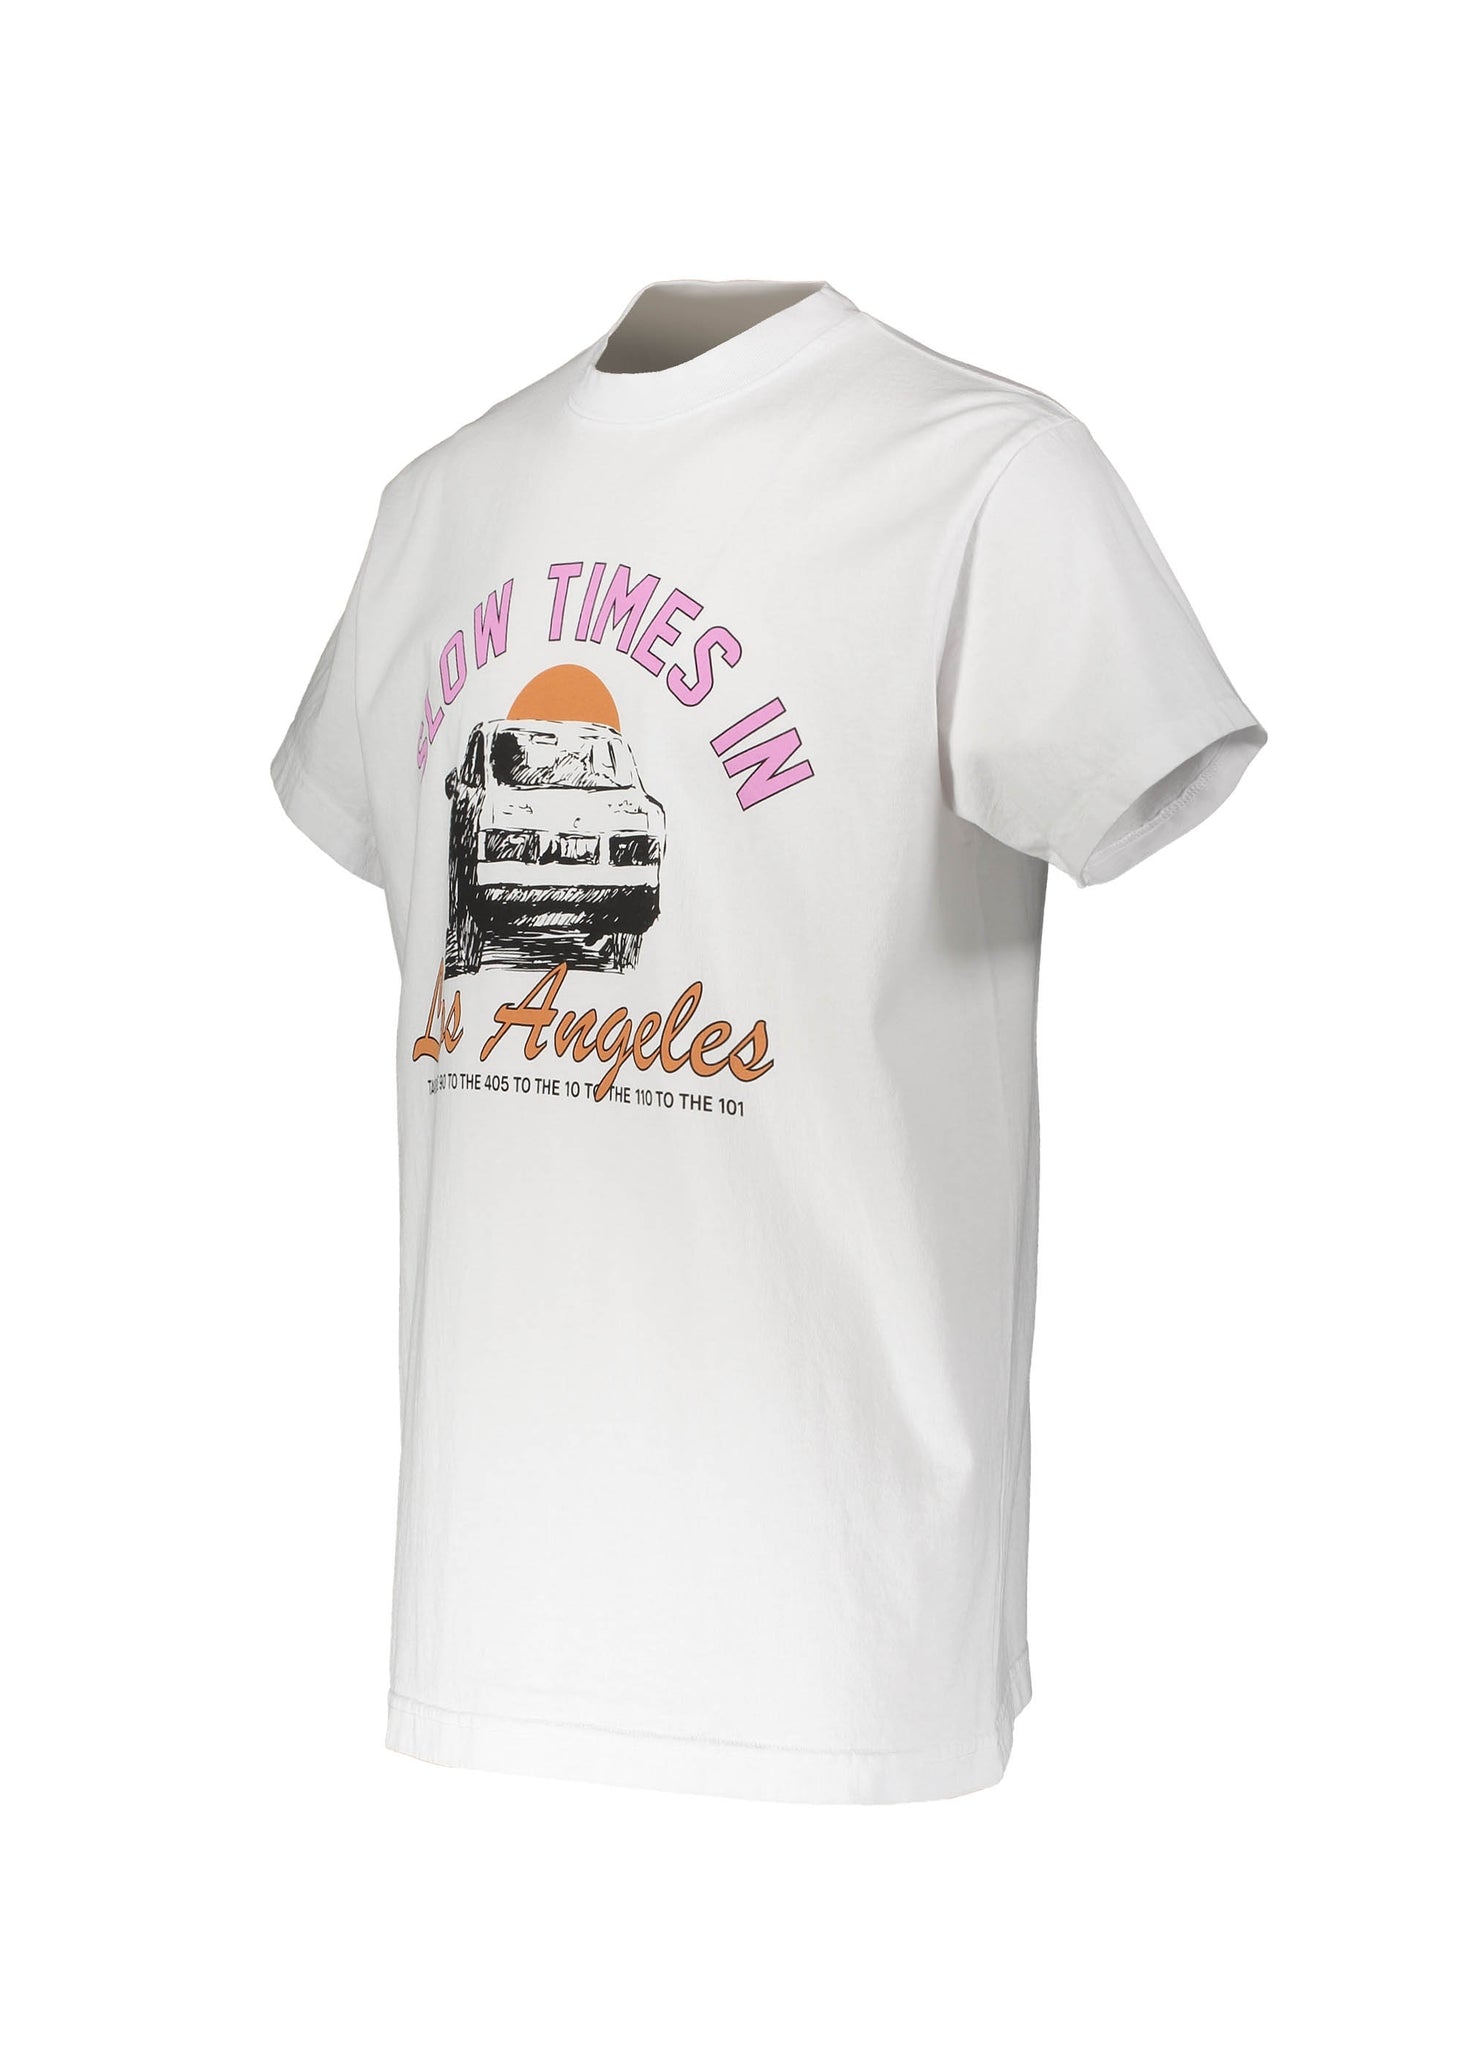 General Admission Slow Times Tee - White